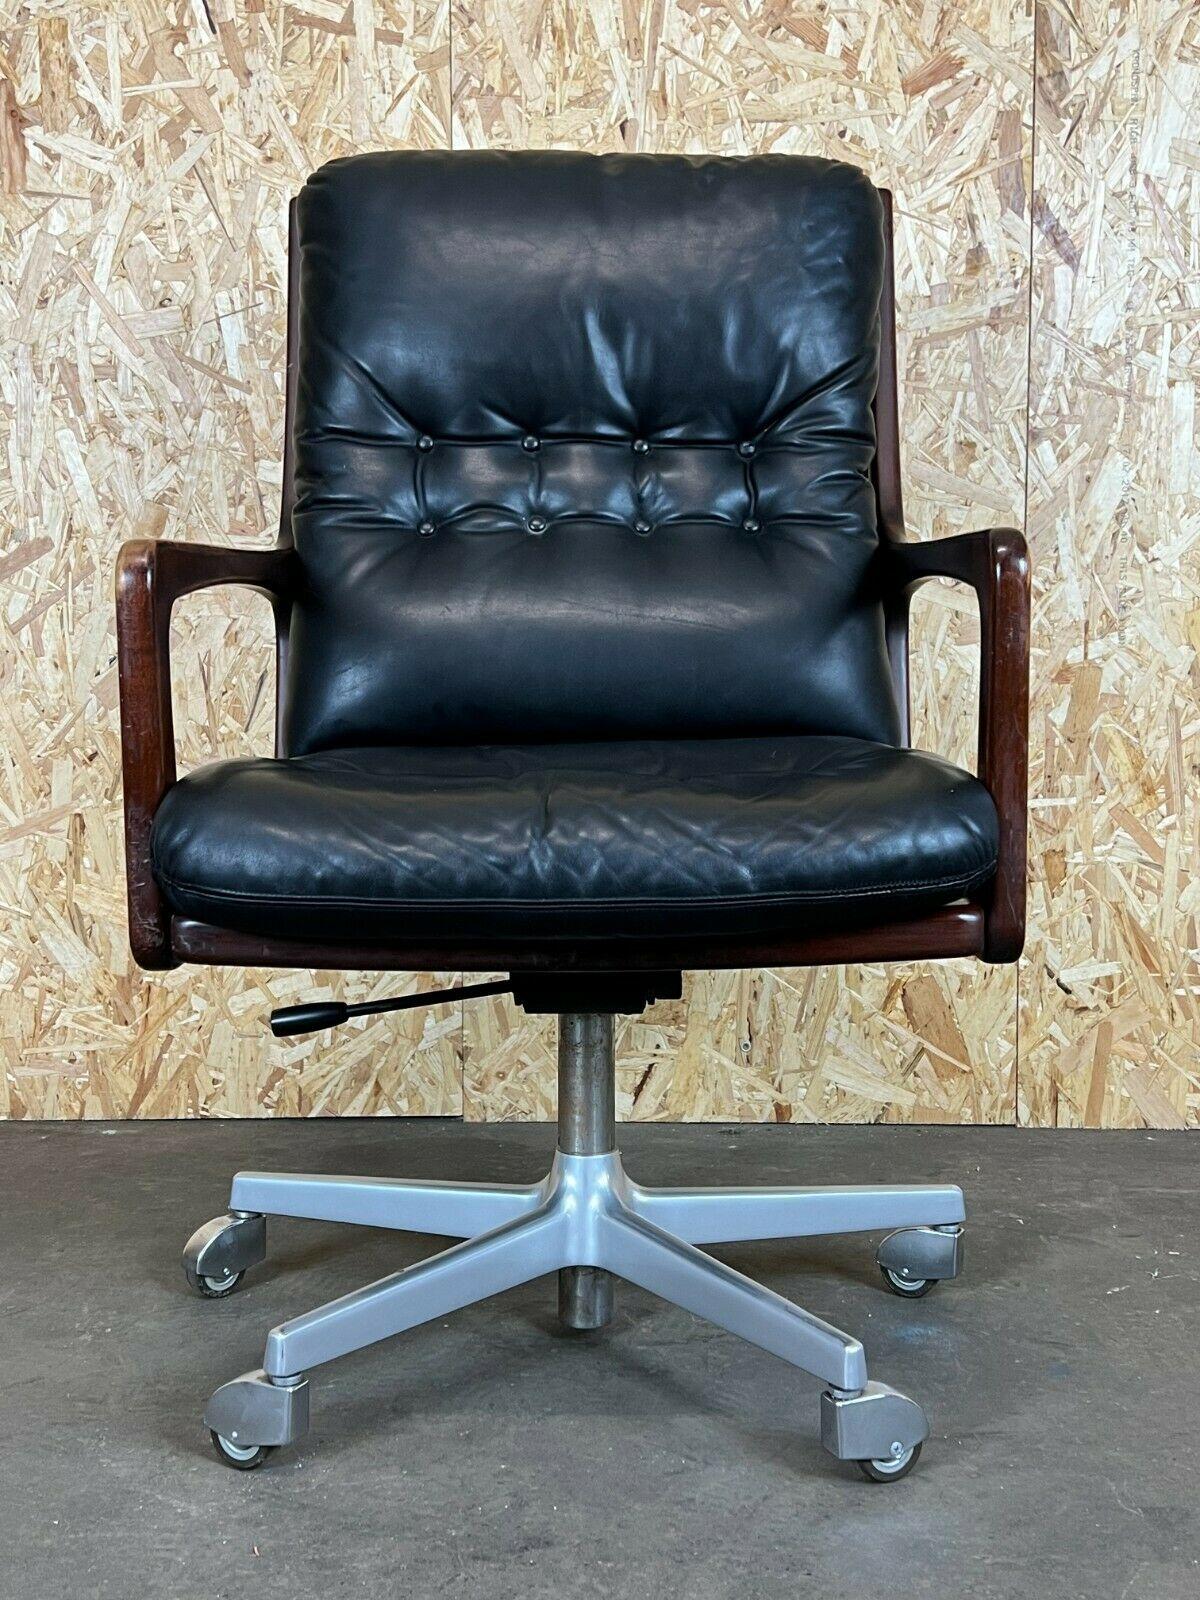 60s 70s chair office chair Eugen Schmidt Solofom swivel chair leather design 60s

Object: swivel chair

Manufacturer: Soloform

Condition: good - vintage

Age: around 1960-1970

Dimensions:

63.5cm x 72cm x 110cm
Seat height =